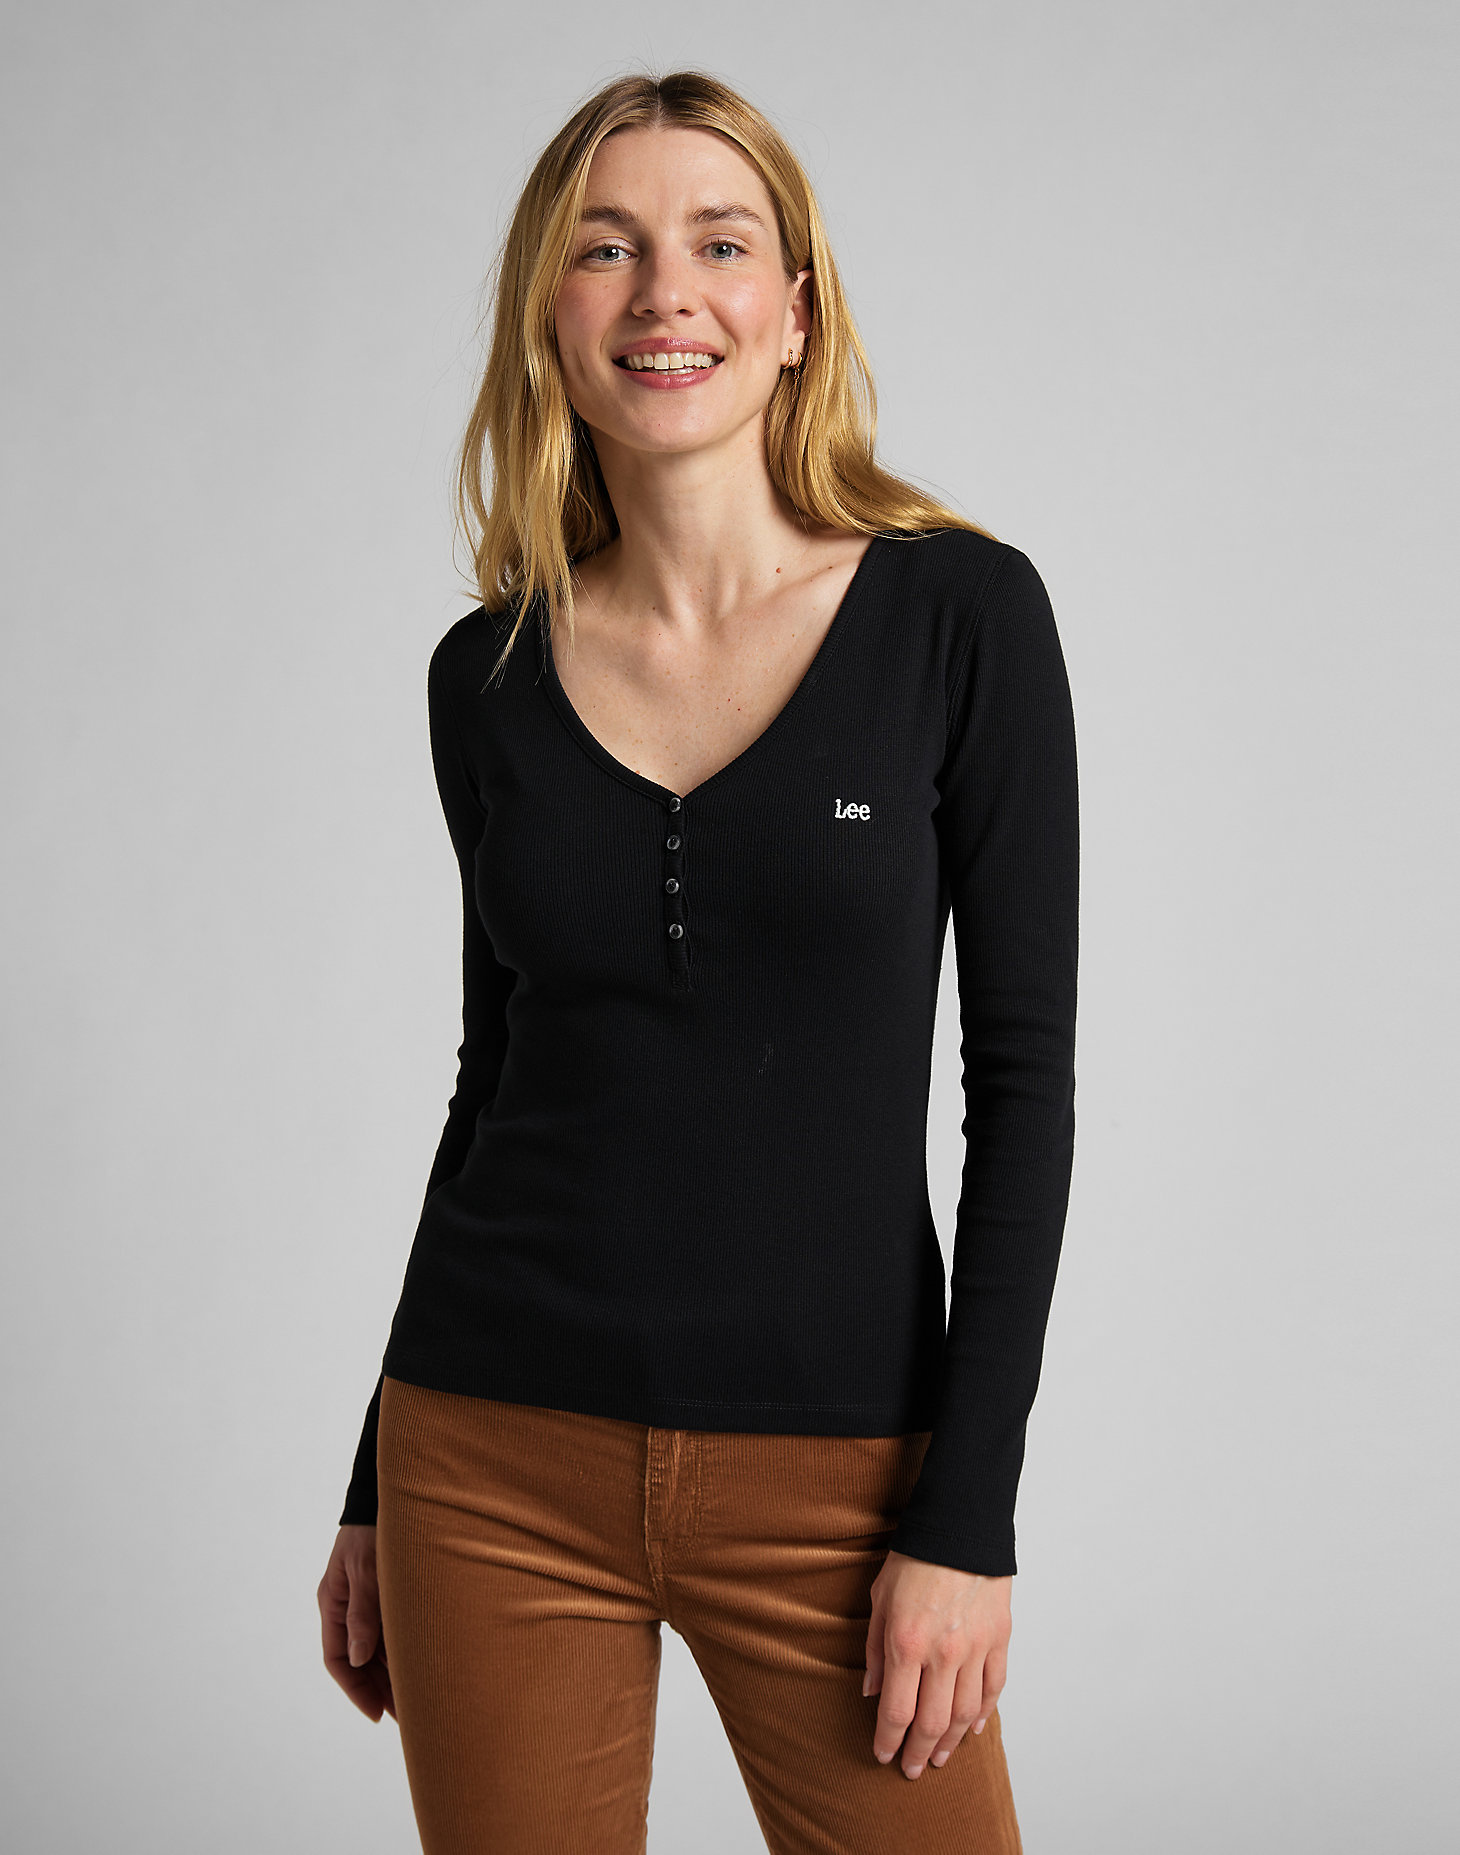 Ribbed Long Sleeve Henley in Black alternative view 2